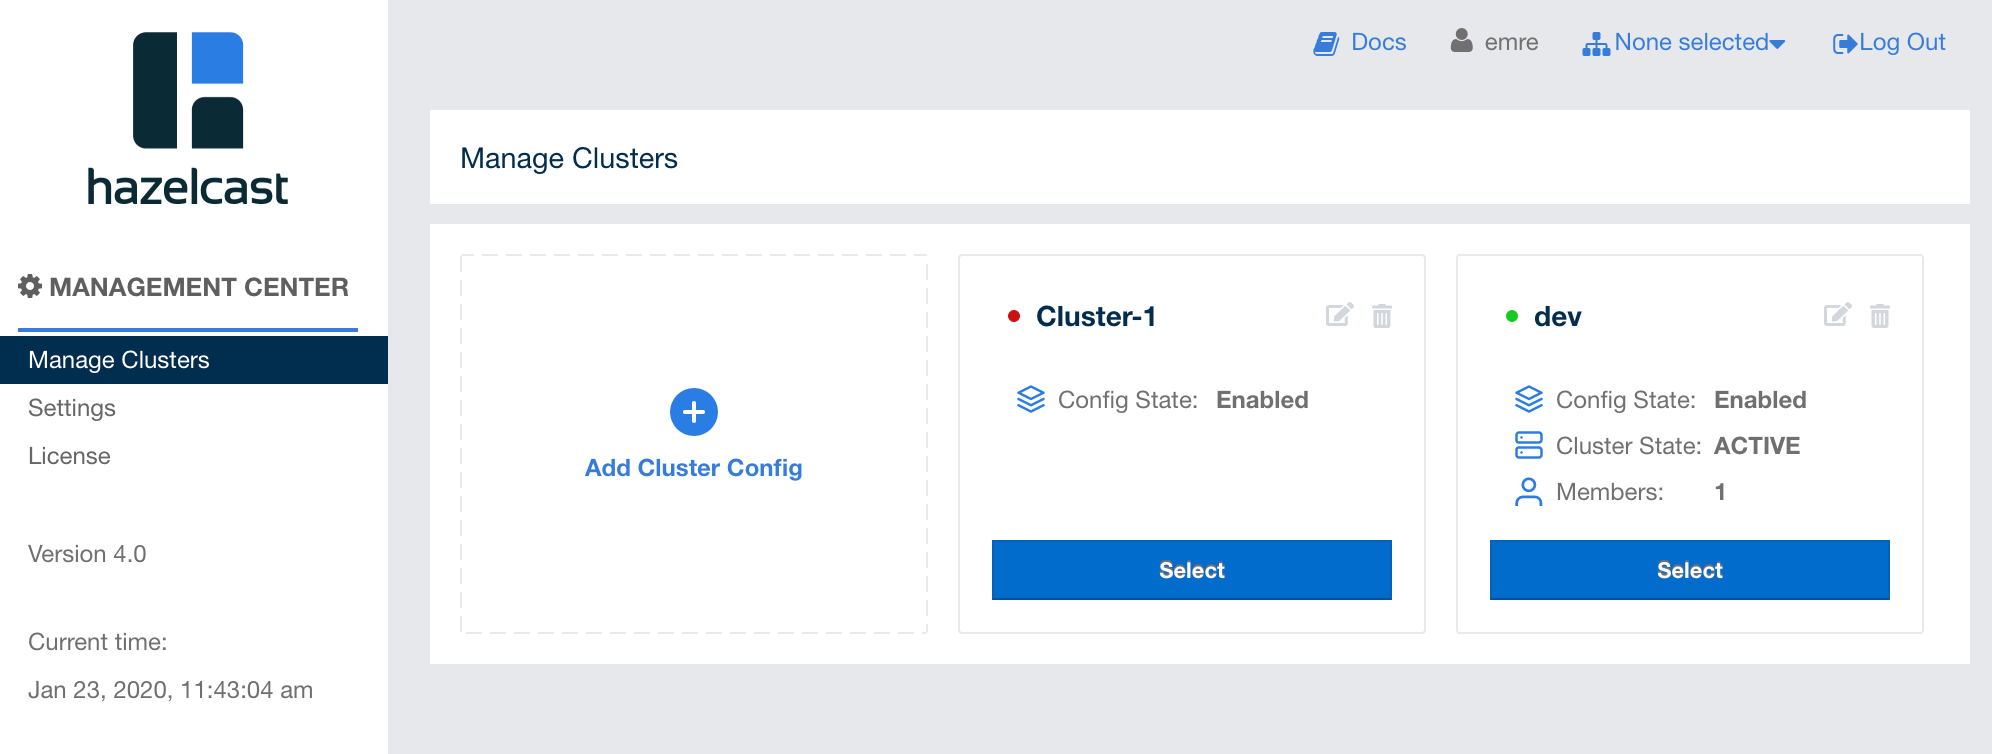 Manage Clusters